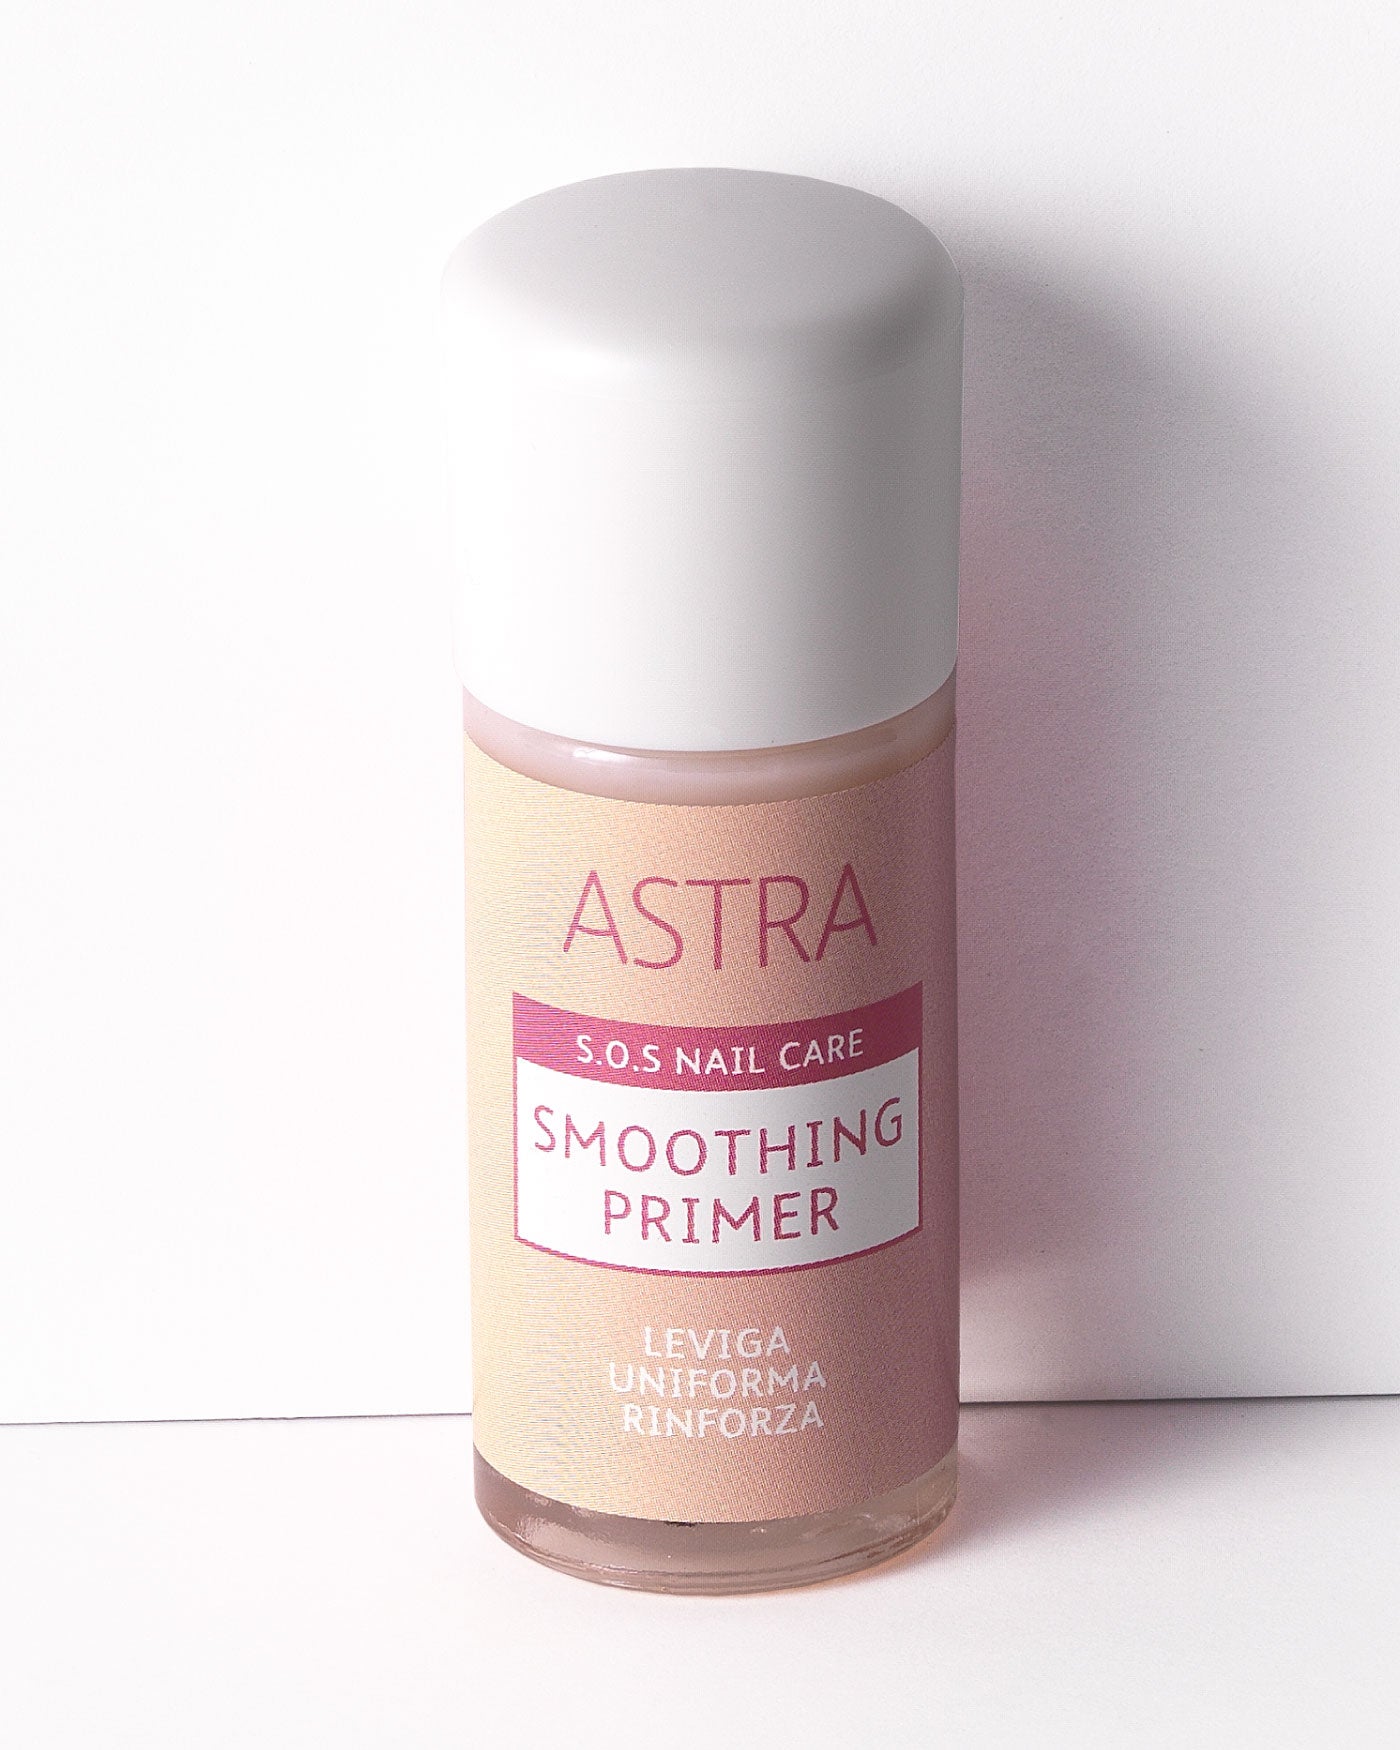 S.O.S NAIL CARE -  SMOOTHING PRIMER - Default Title - Astra Make-Up